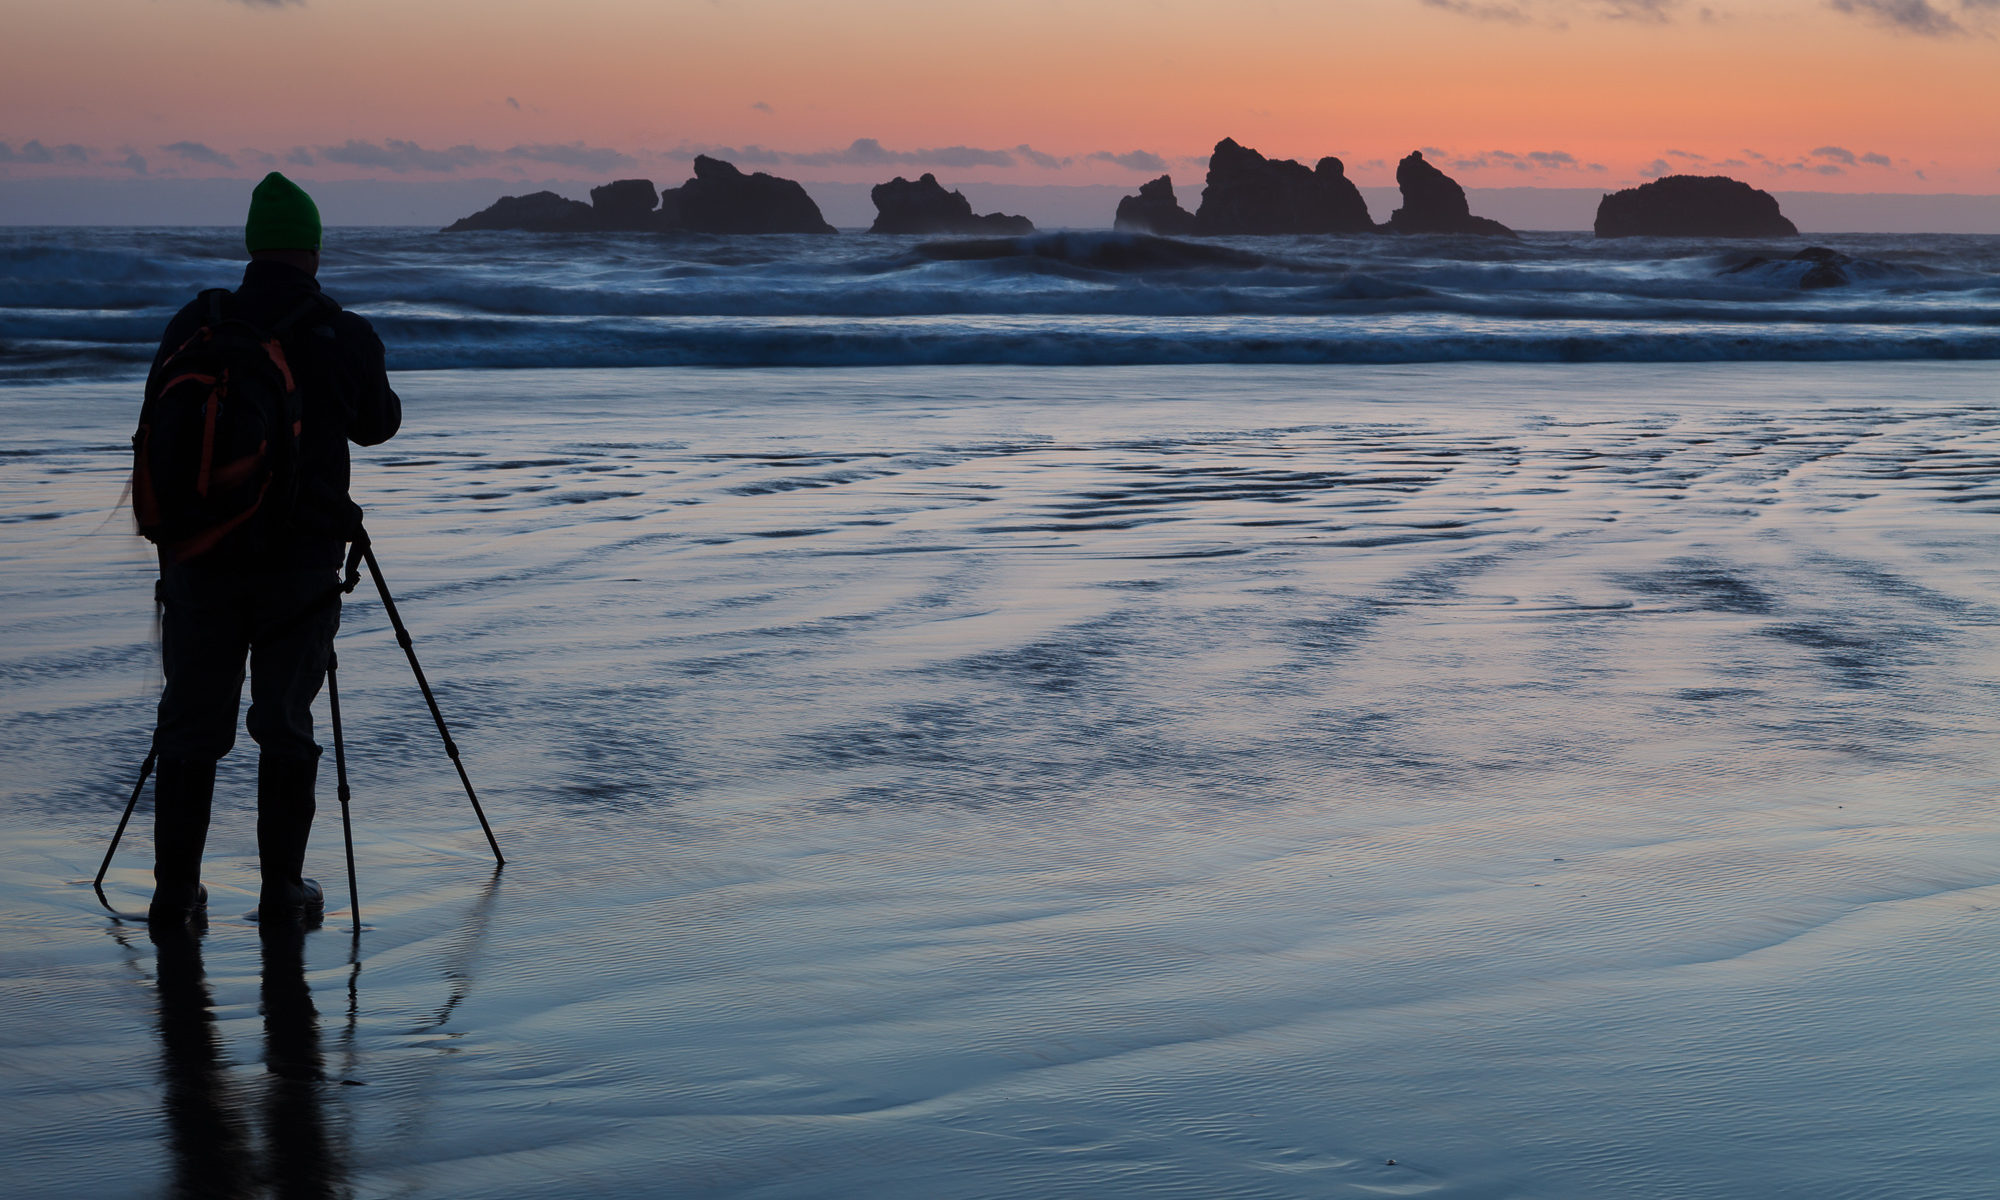 A photographer stands in shallow water filming a fleeting sunset